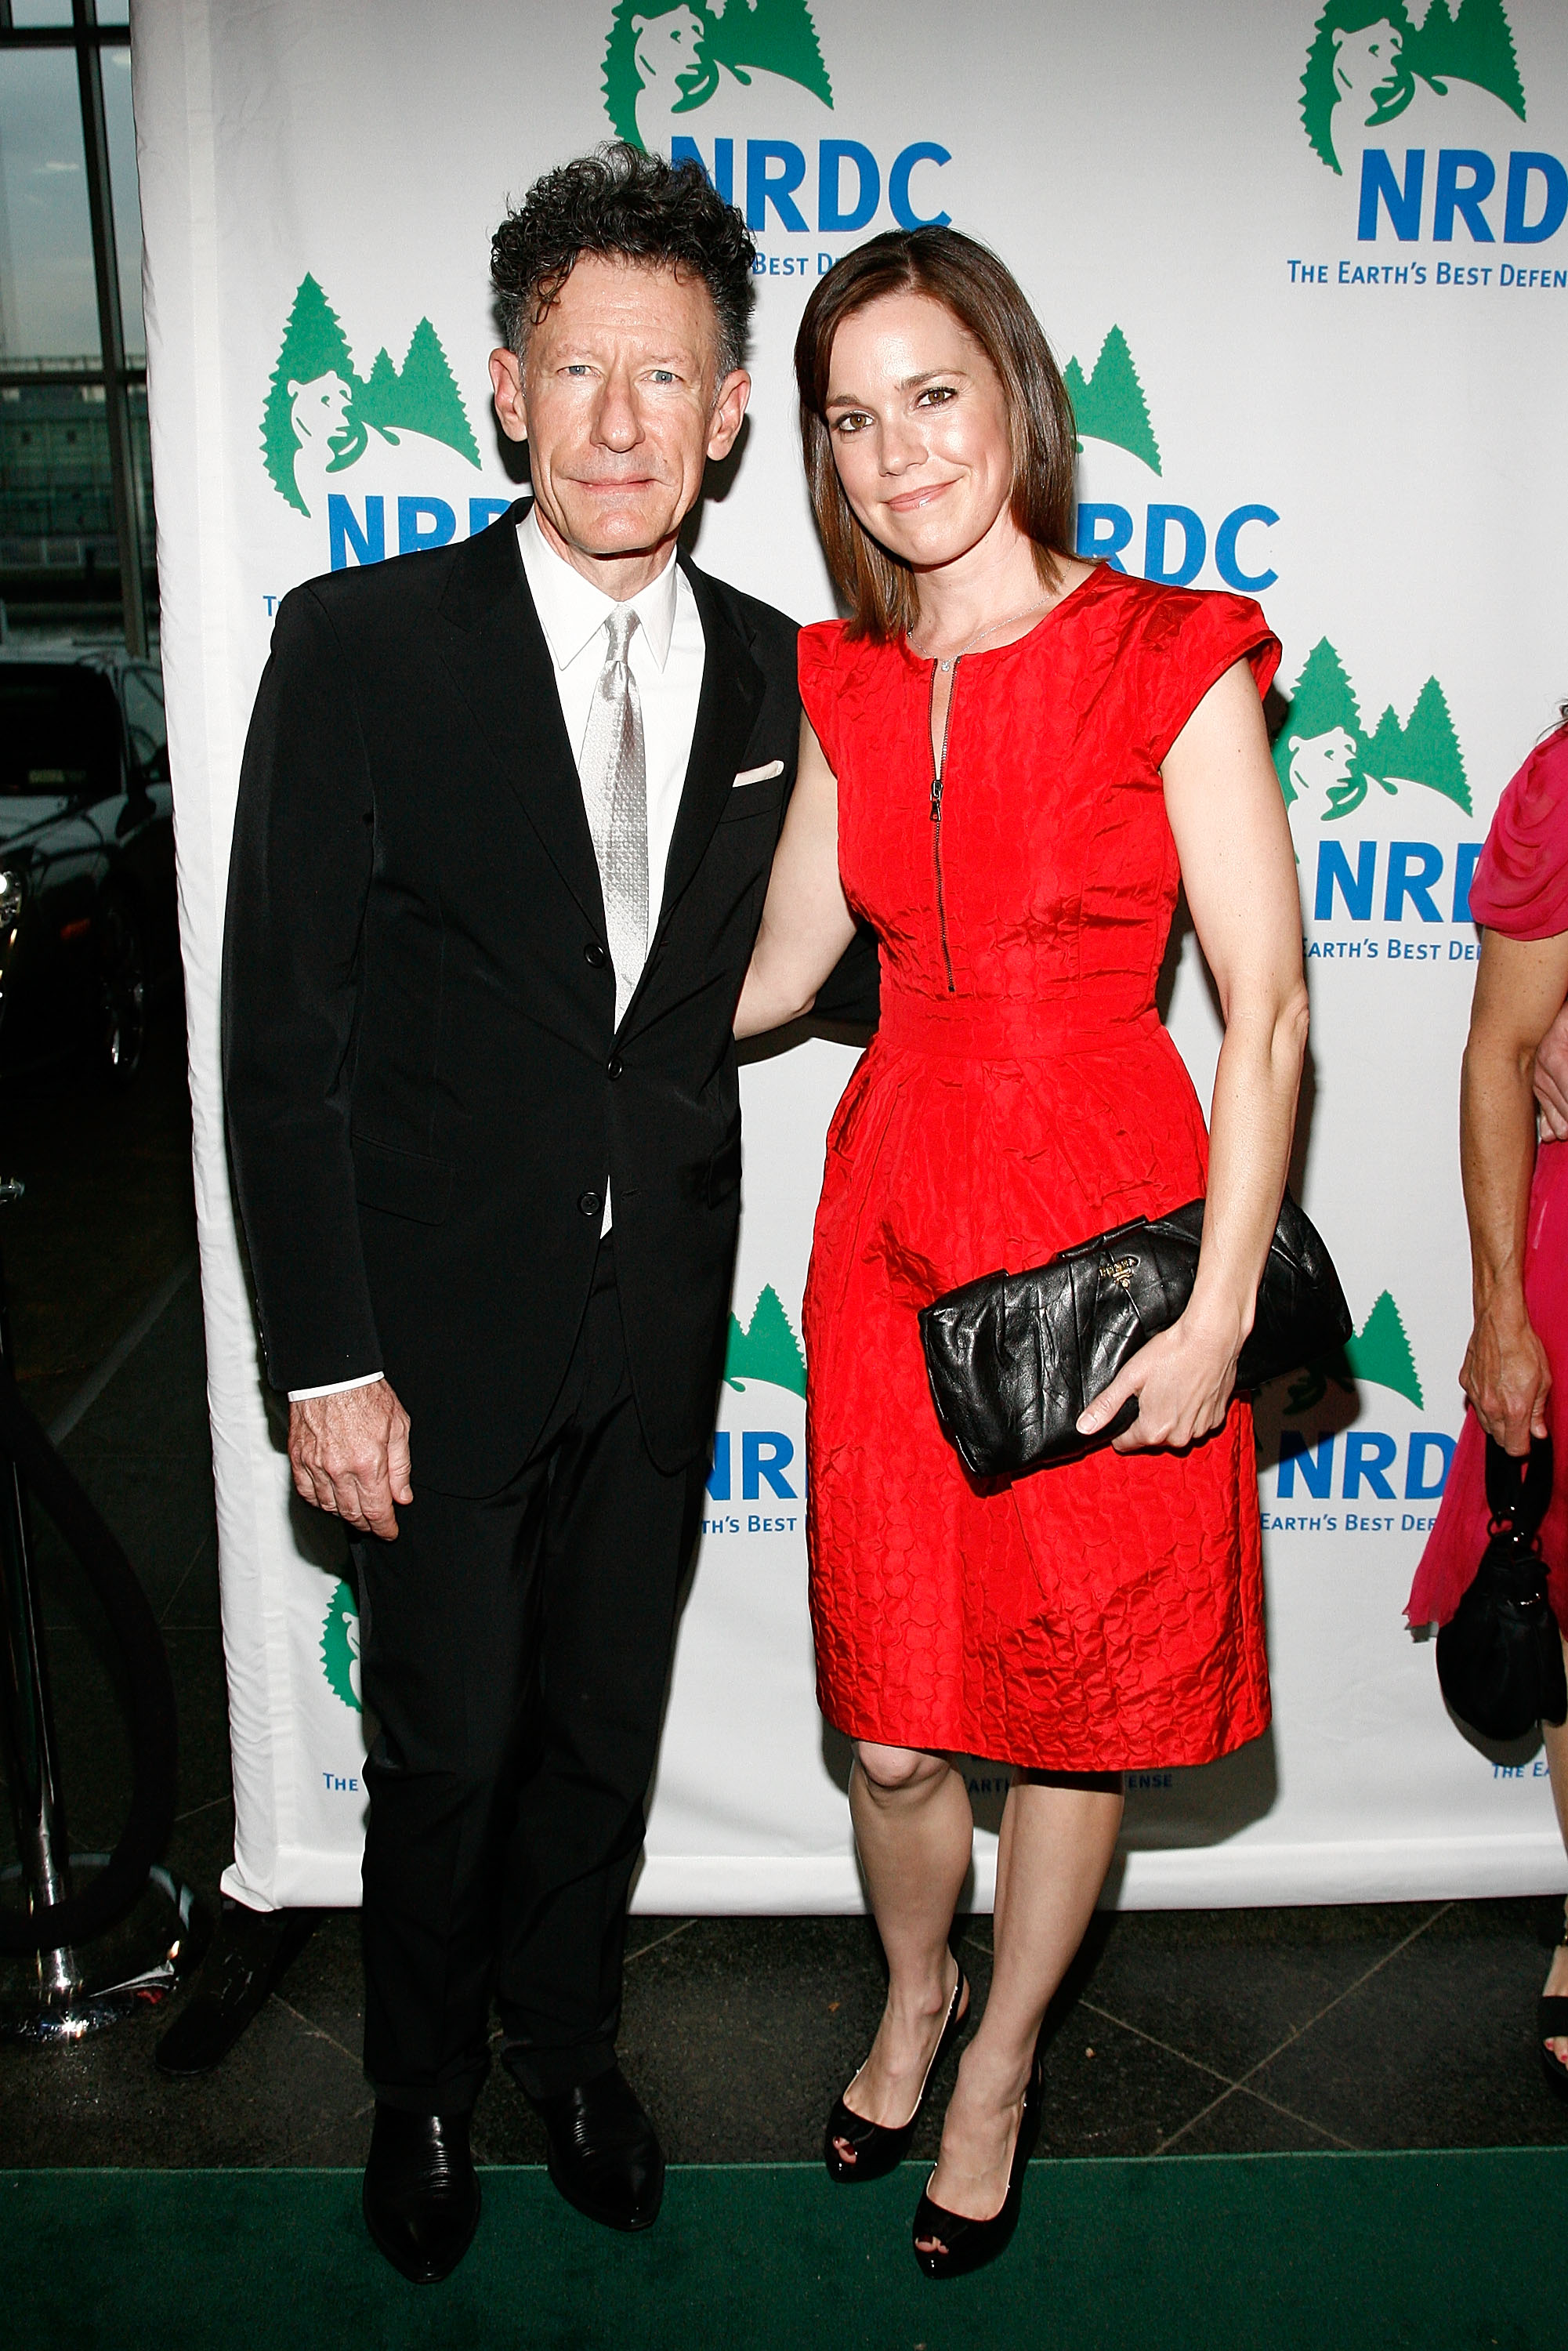 Lyle Lovett and April Kimble attend the 12th annual "Forces for Nature" gala benefit at Pier Sixty at Chelsea Piers on April 15, 2010, in New York City. | Source: Getty Images